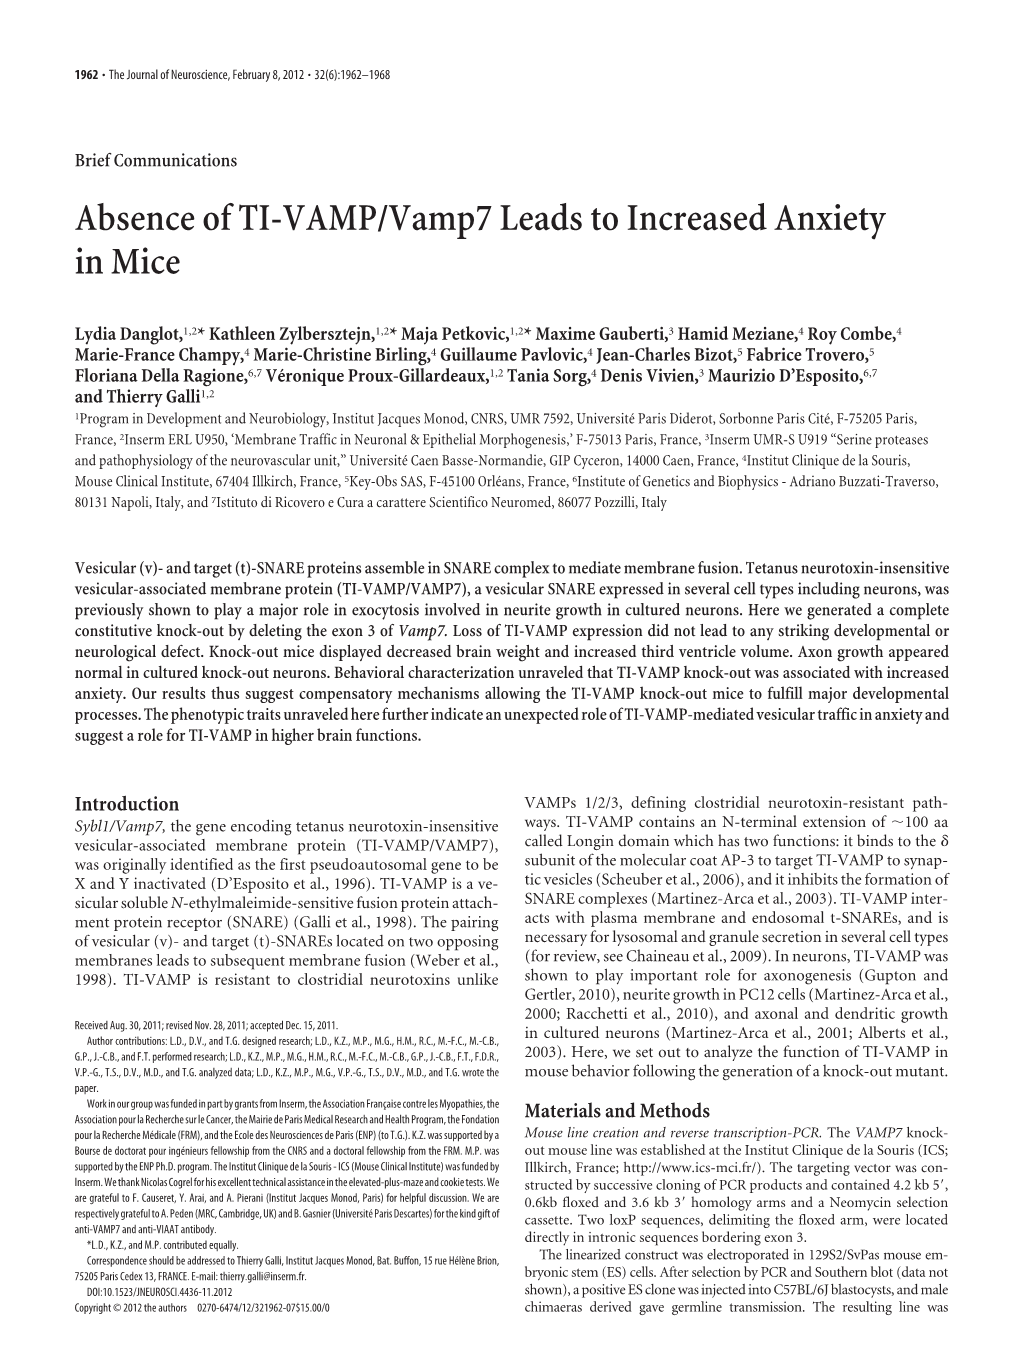 Absence of TI-VAMP/Vamp7 Leads to Increased Anxiety in Mice